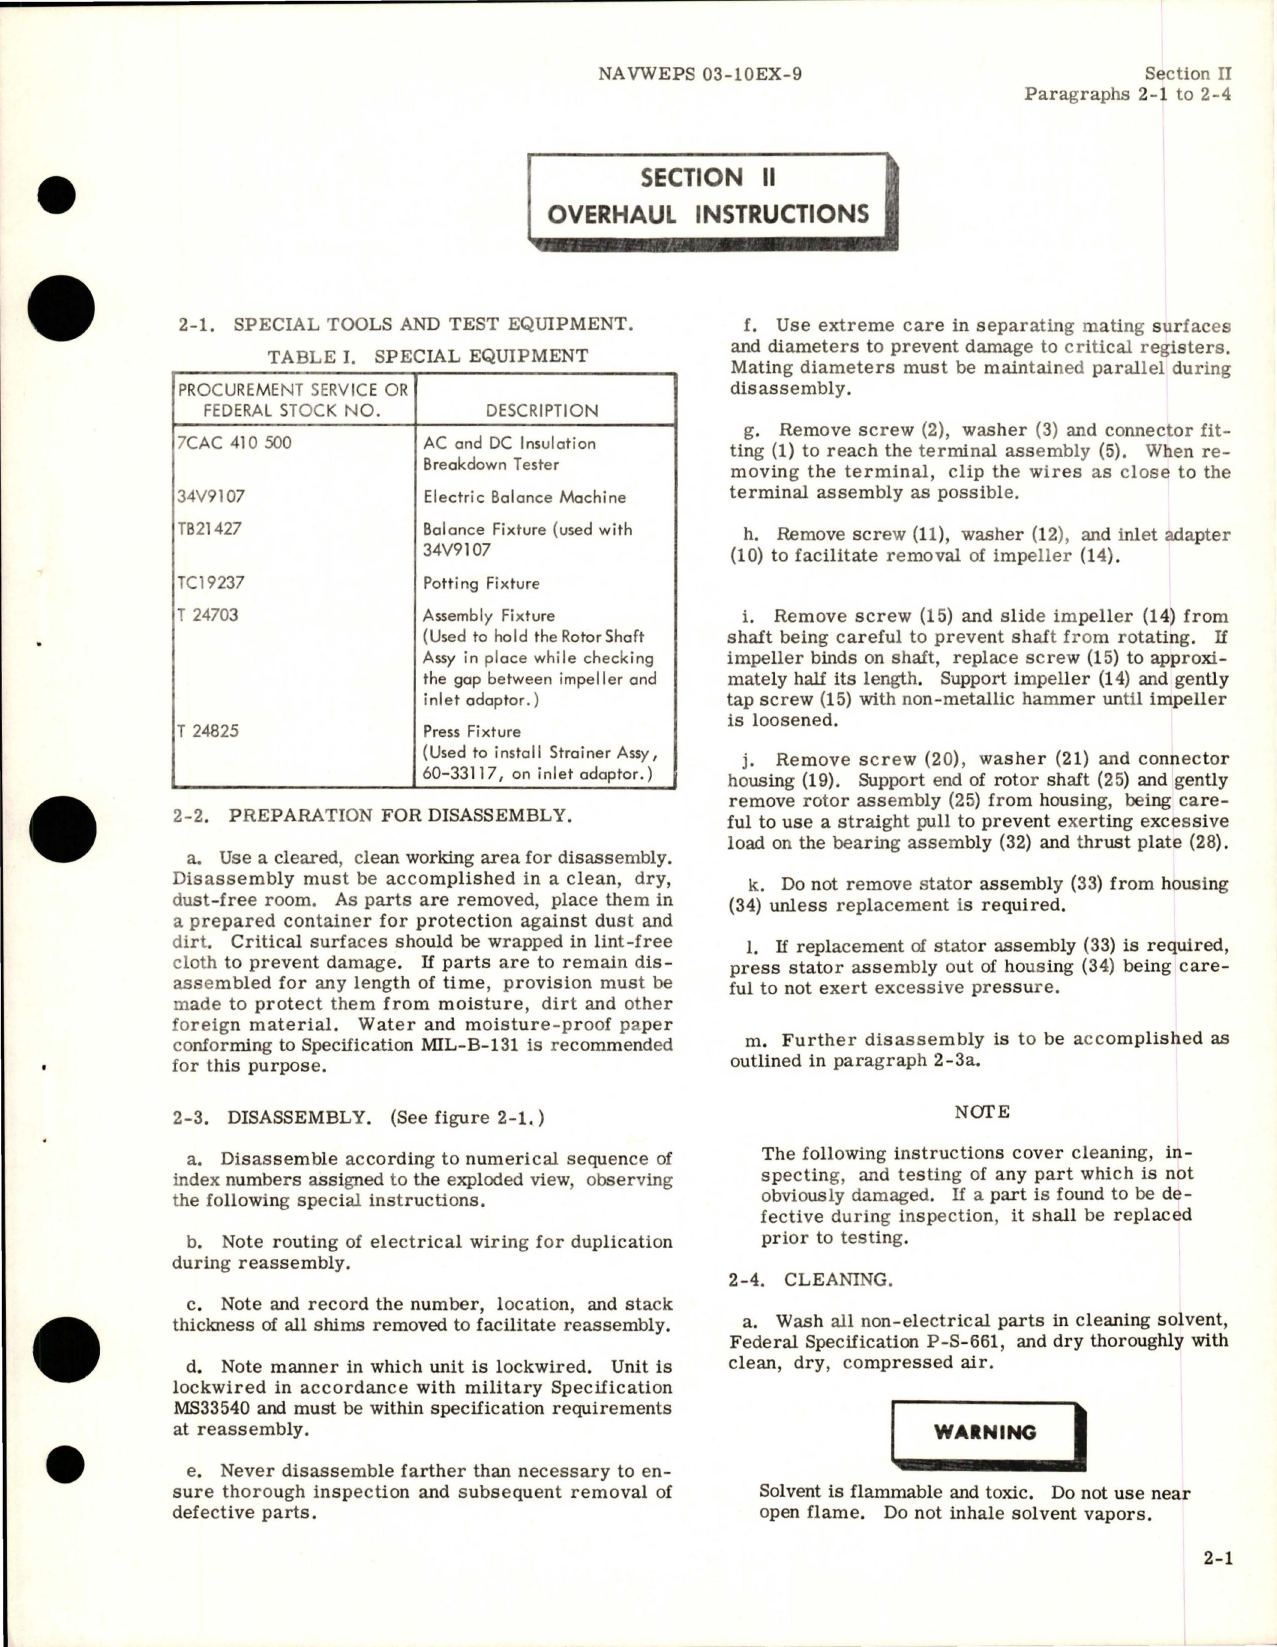 Sample page 7 from AirCorps Library document: Overhaul Instructions for Tank Scavenger Fuel Pump - Part 60-331 